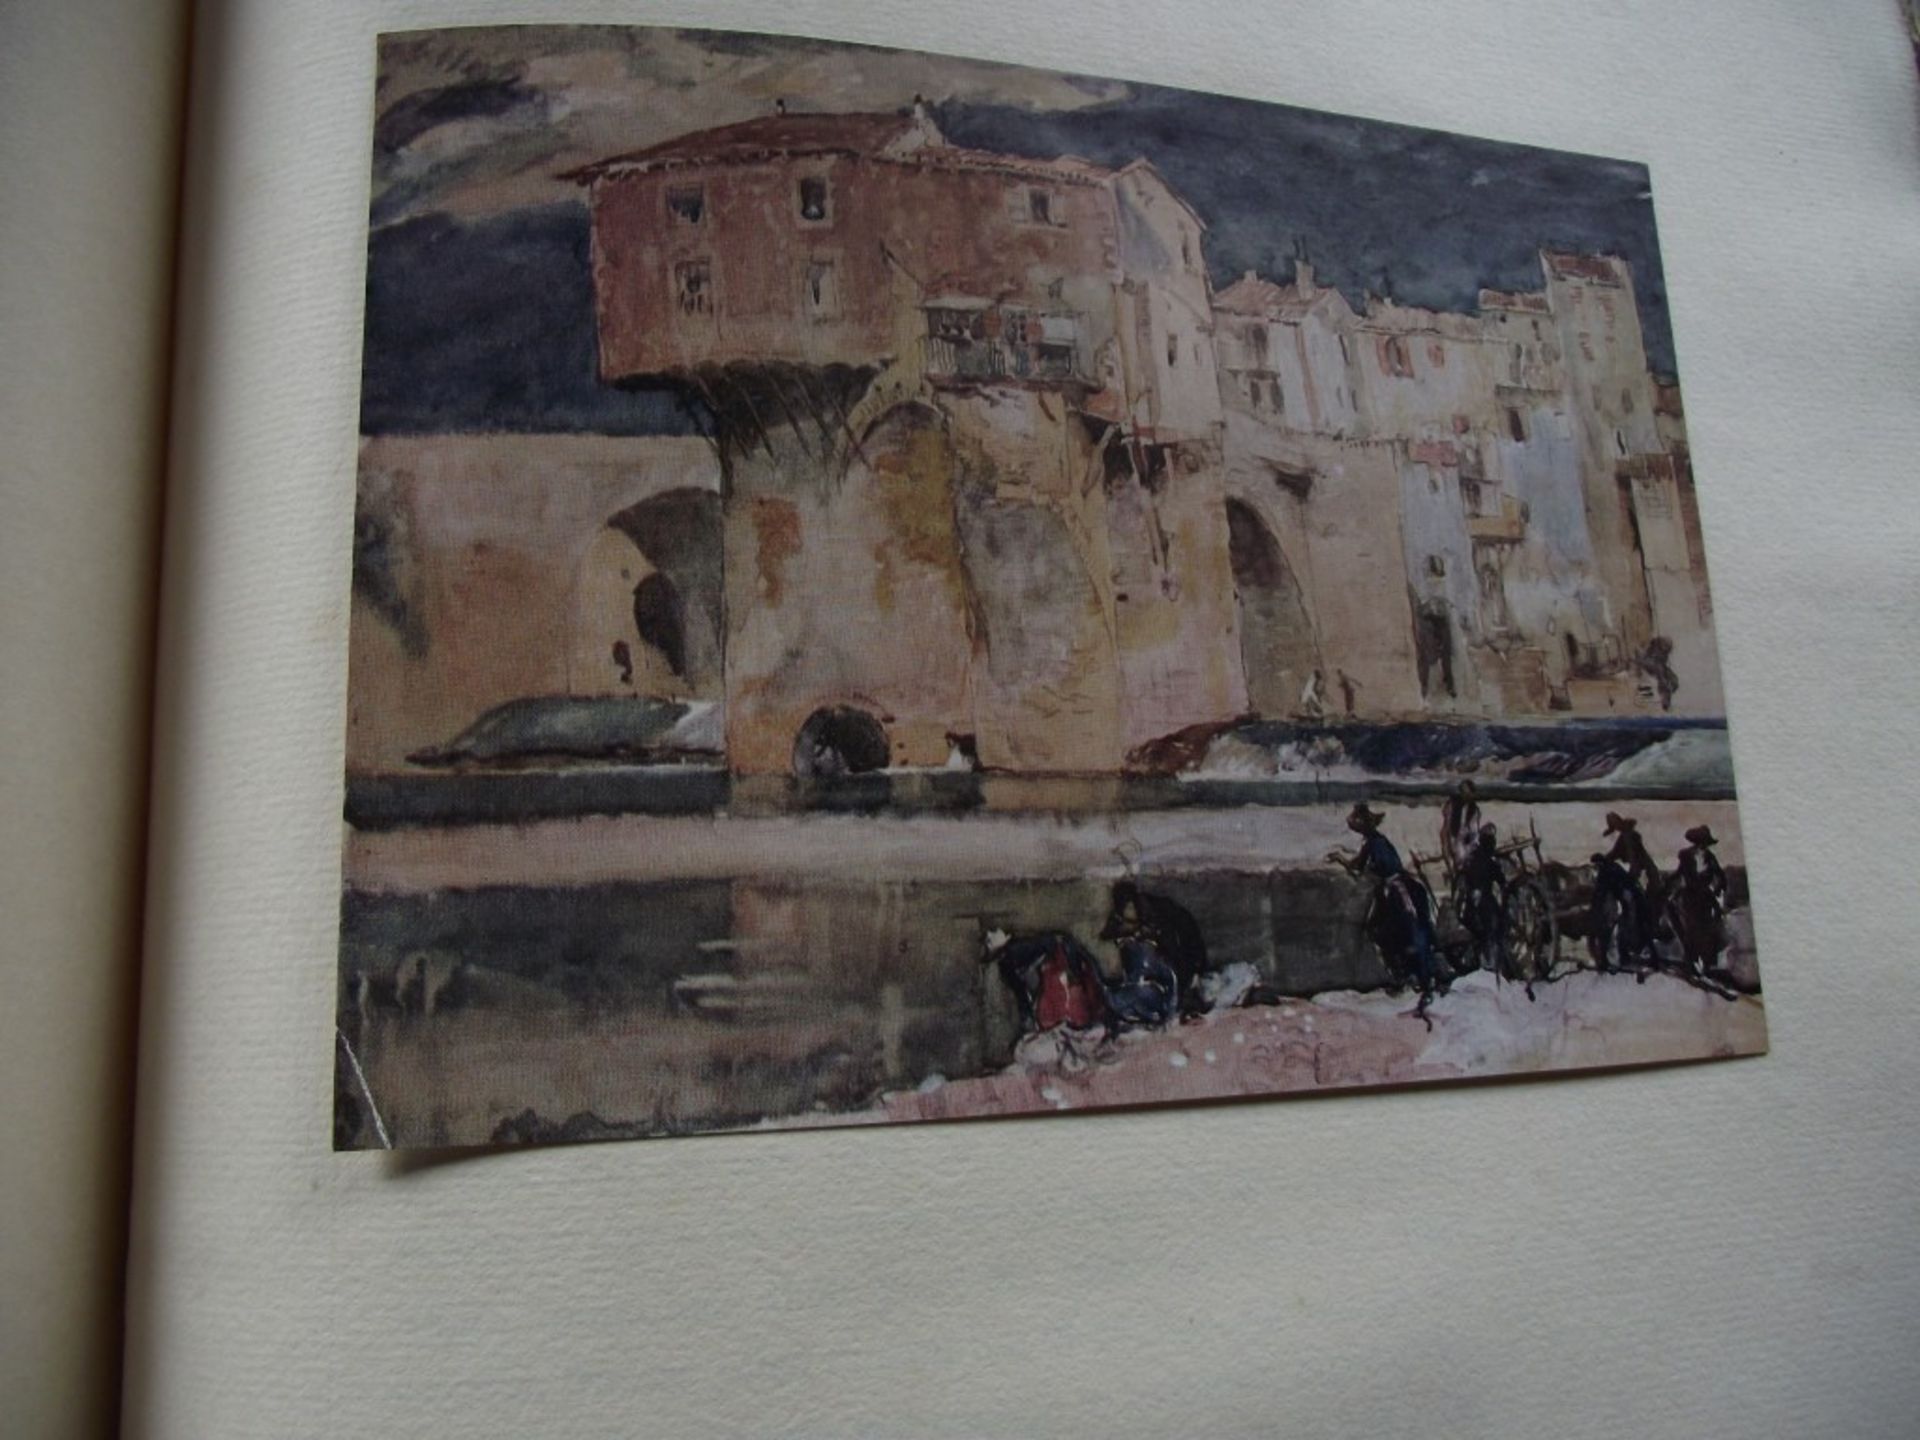 A Book of Bridges by Frank Brangwyn & Walter Shaw Sparrow - Ltd. Edit. 17/75 with Signed Lithograph. - Image 60 of 64